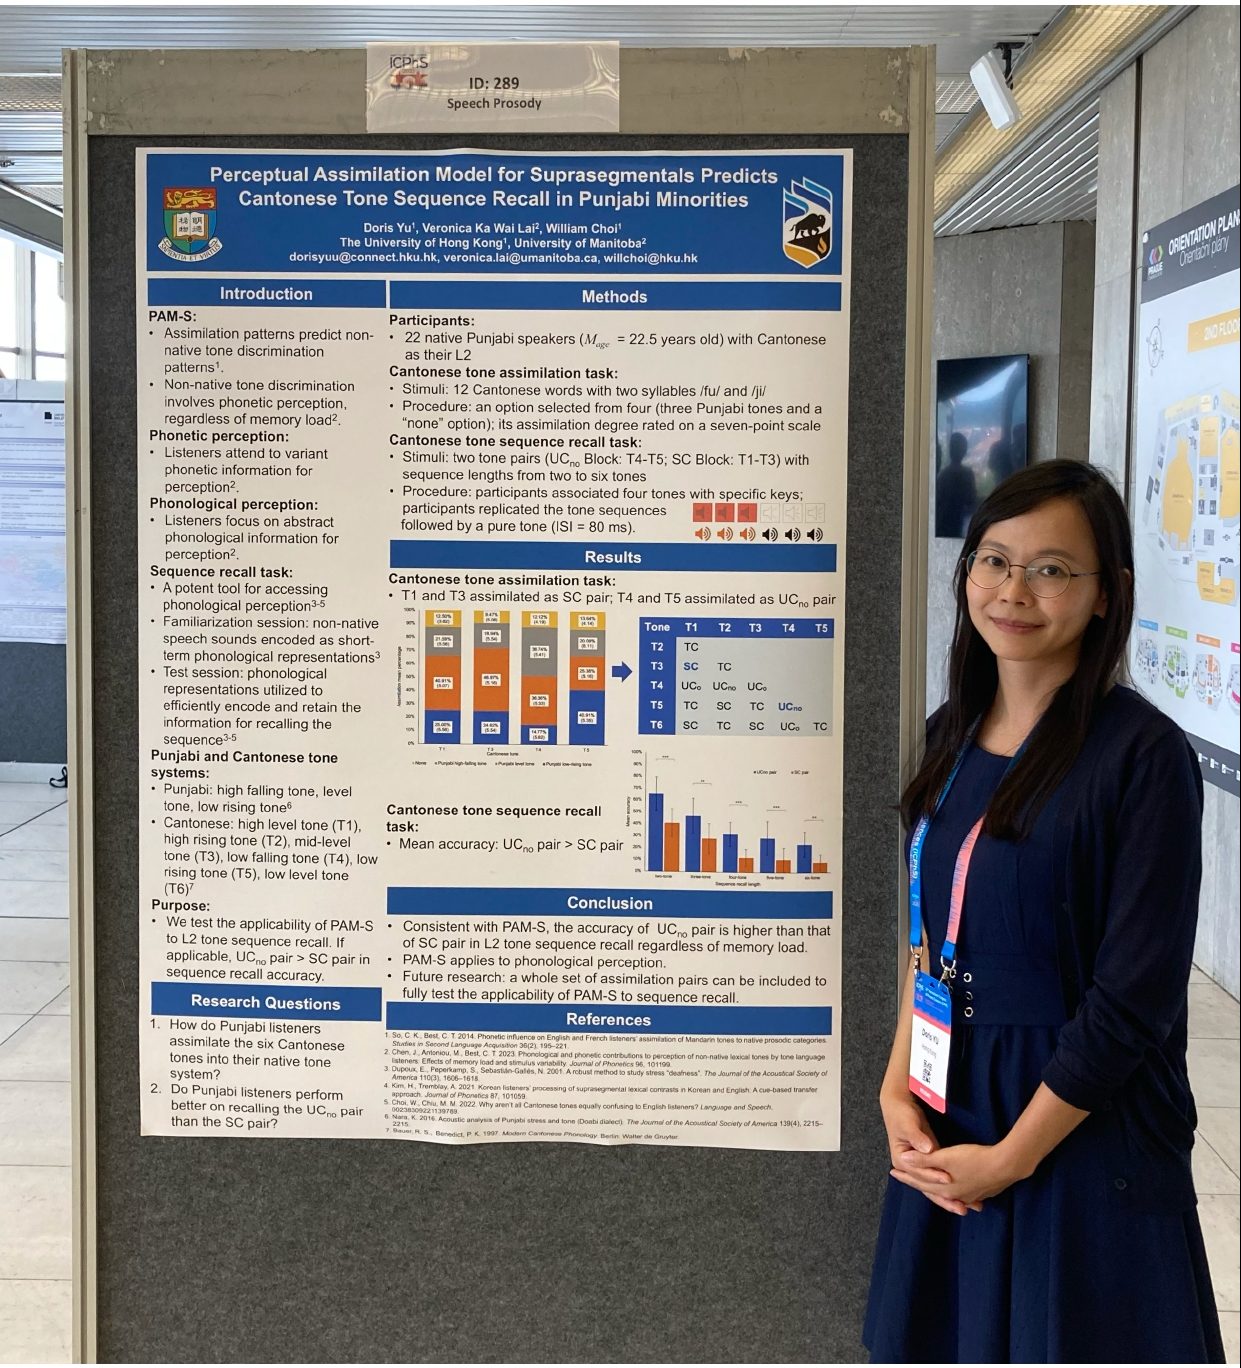 Our PhD student Doris Yu presented at the 20th International Congress of the Phonetic Sciences (ICPhS) in Prague! [9 August]